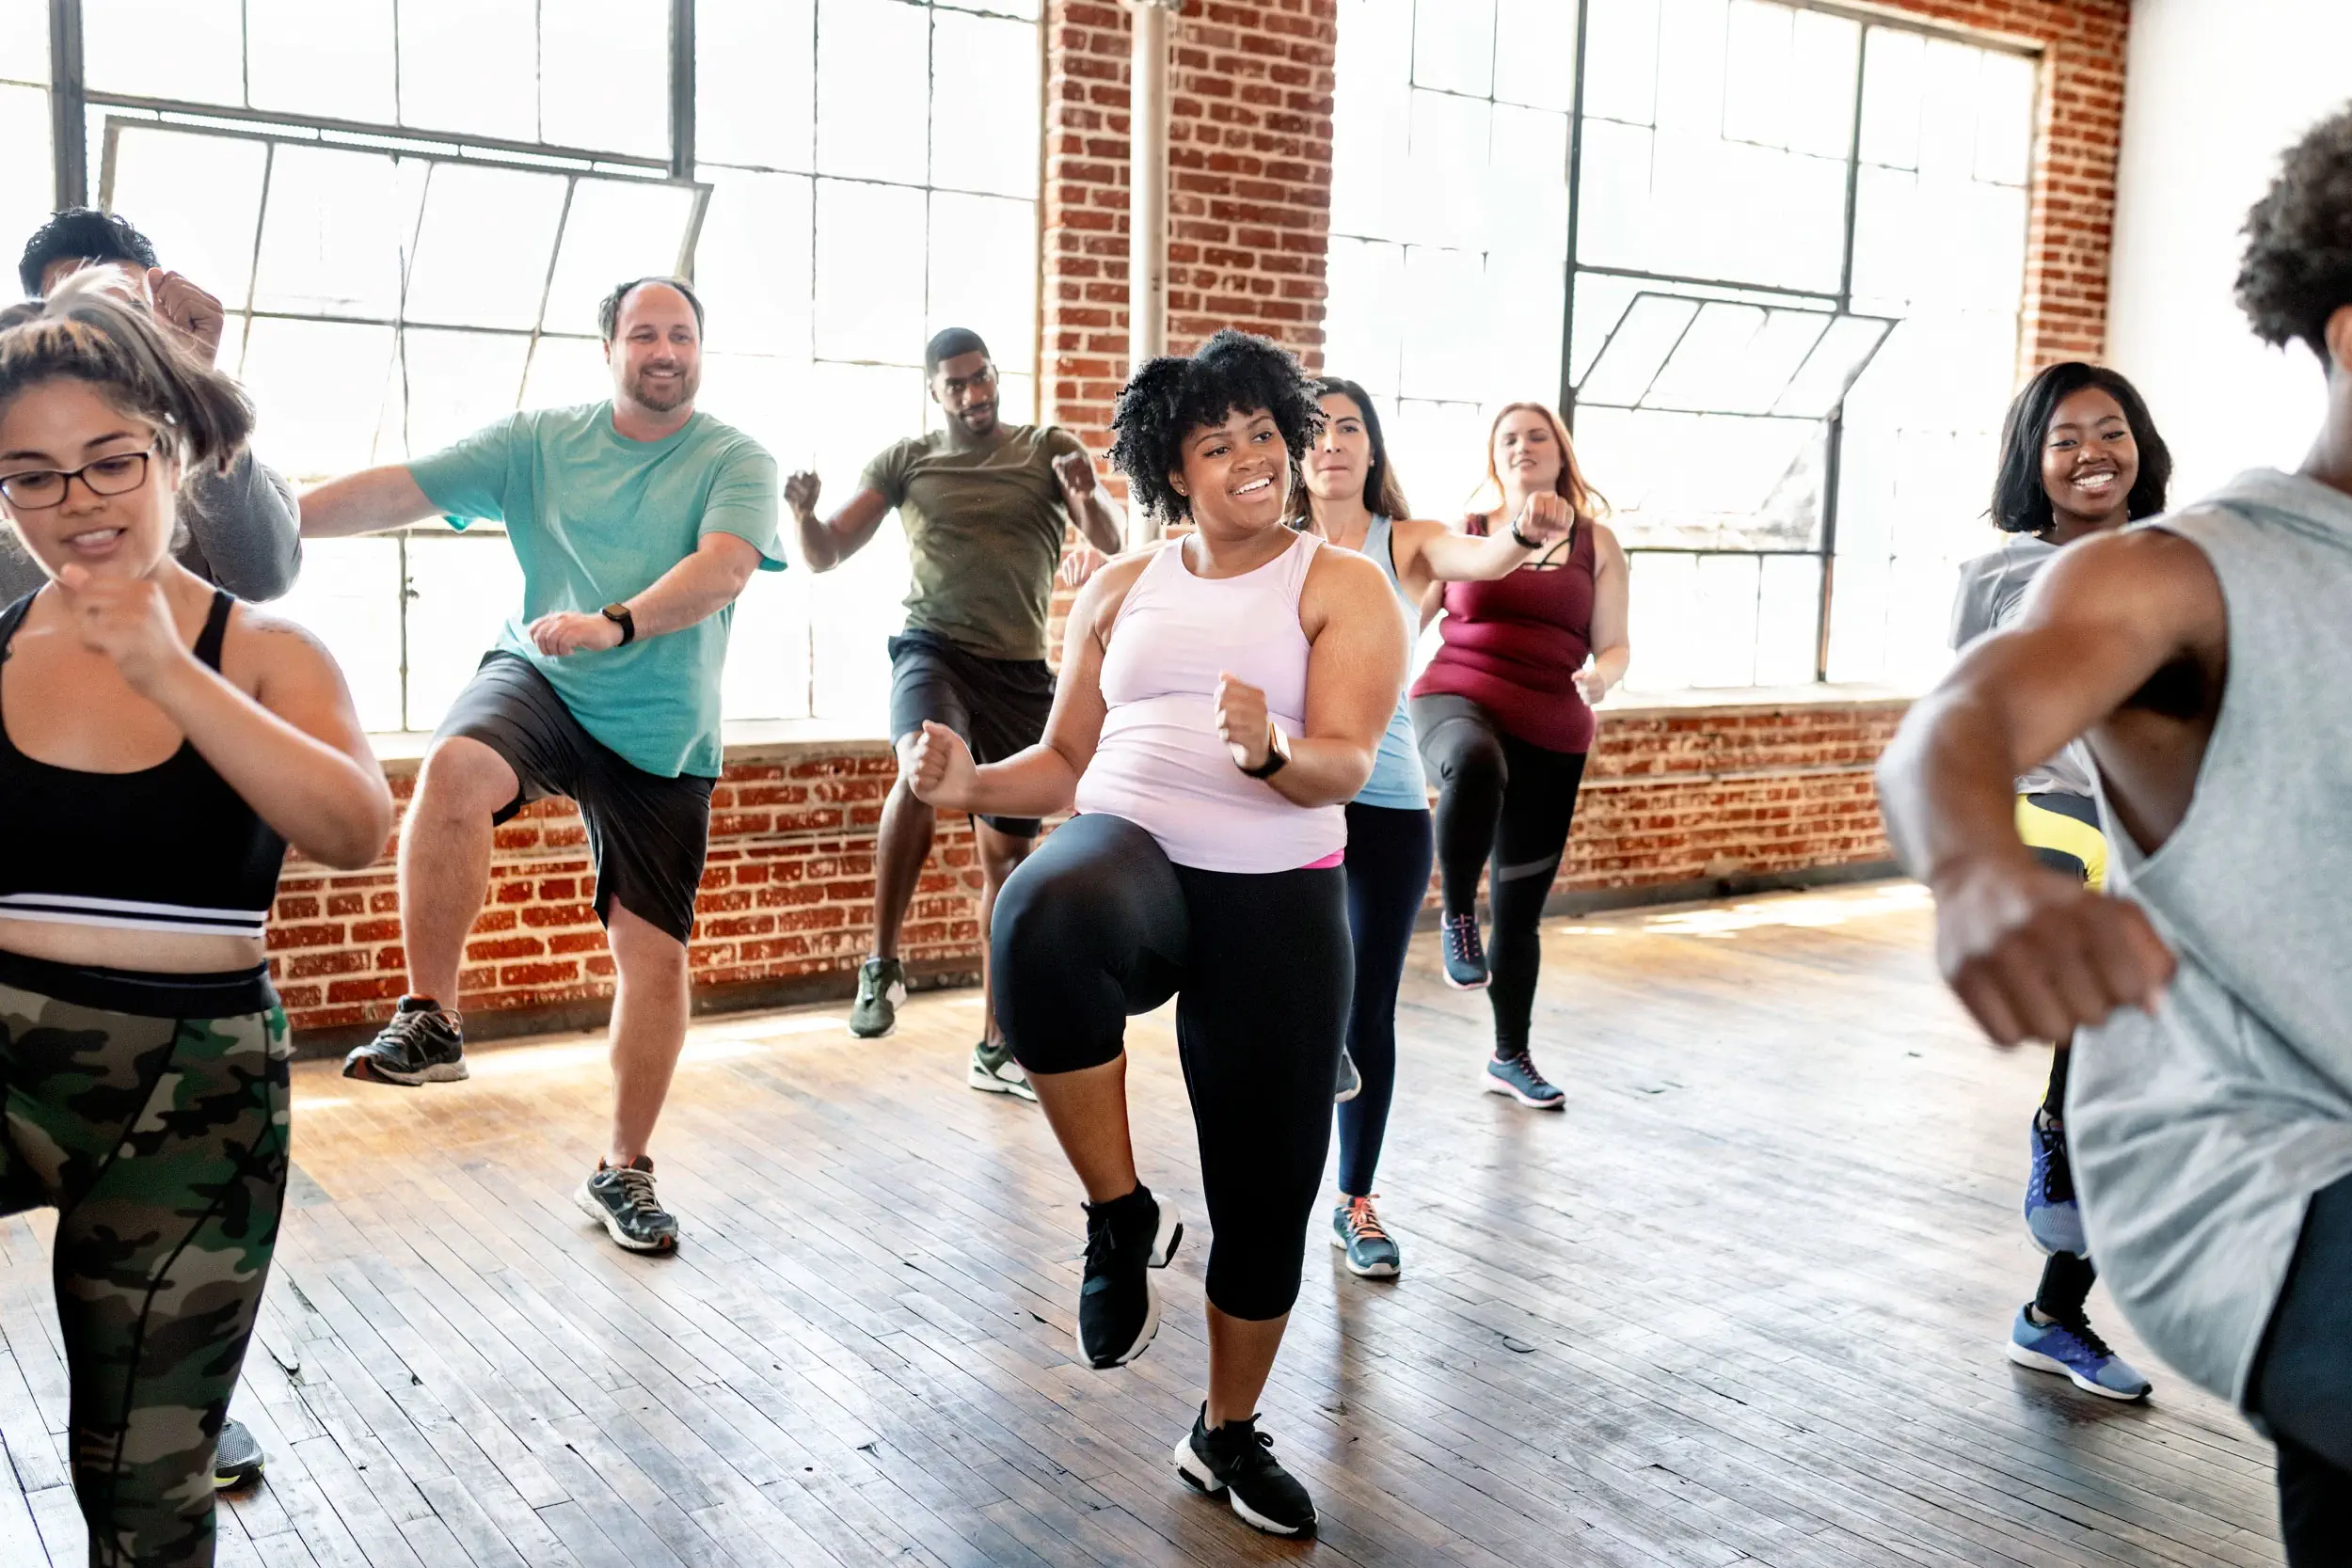 Shaking Off Unwanted Weight With Dancing